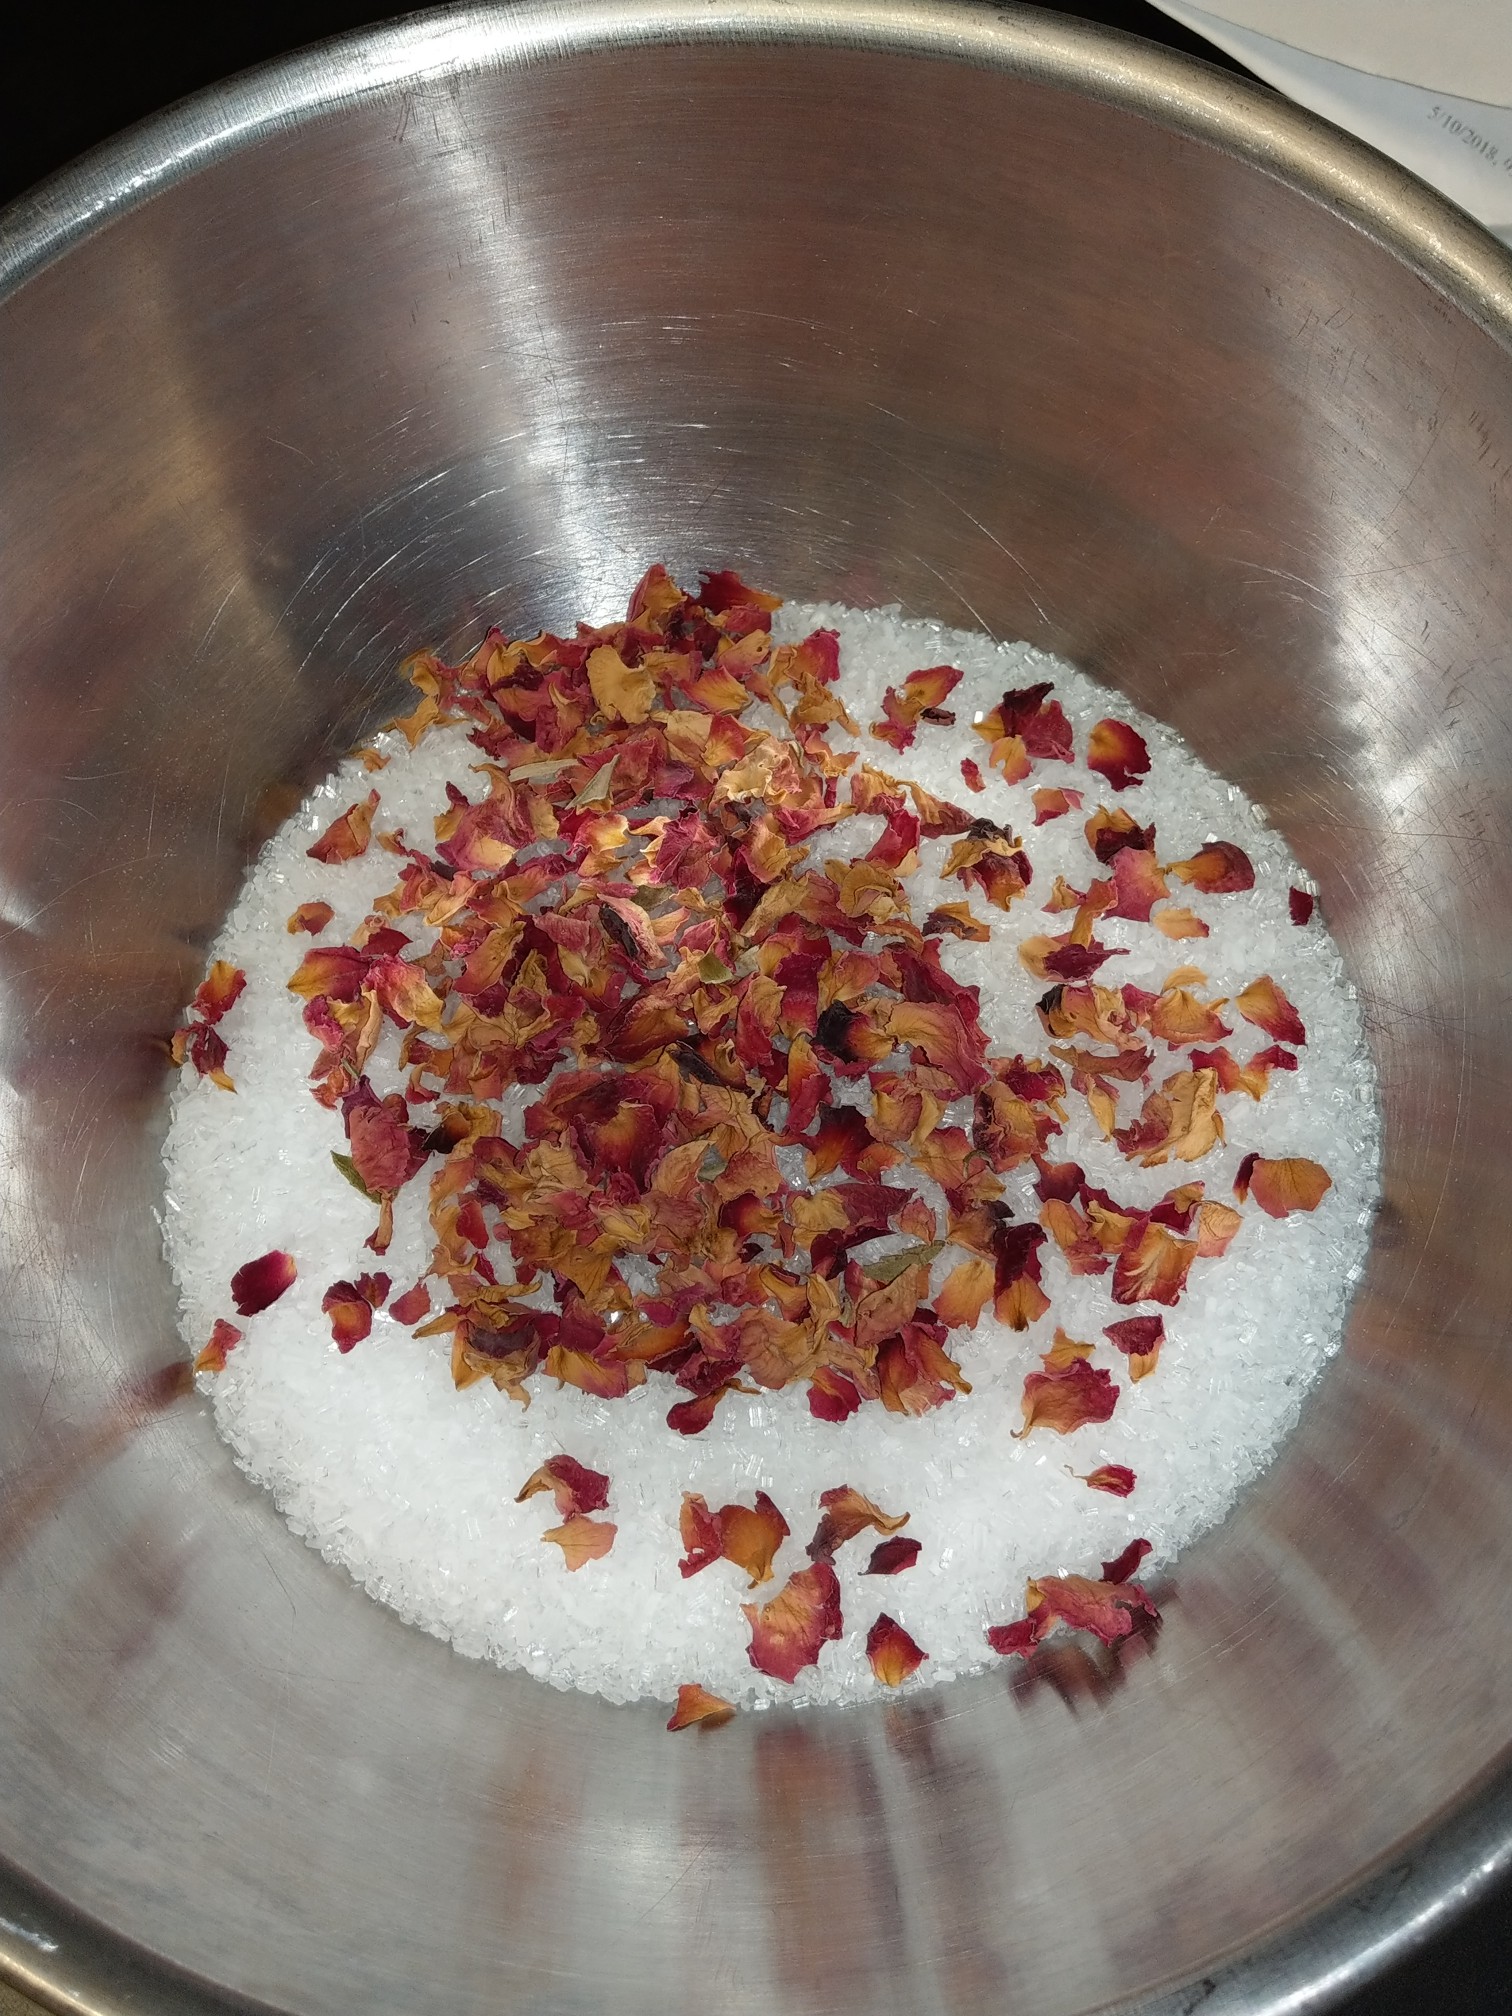 Homemade Christmas Gifts: Scented Bath Salts 1